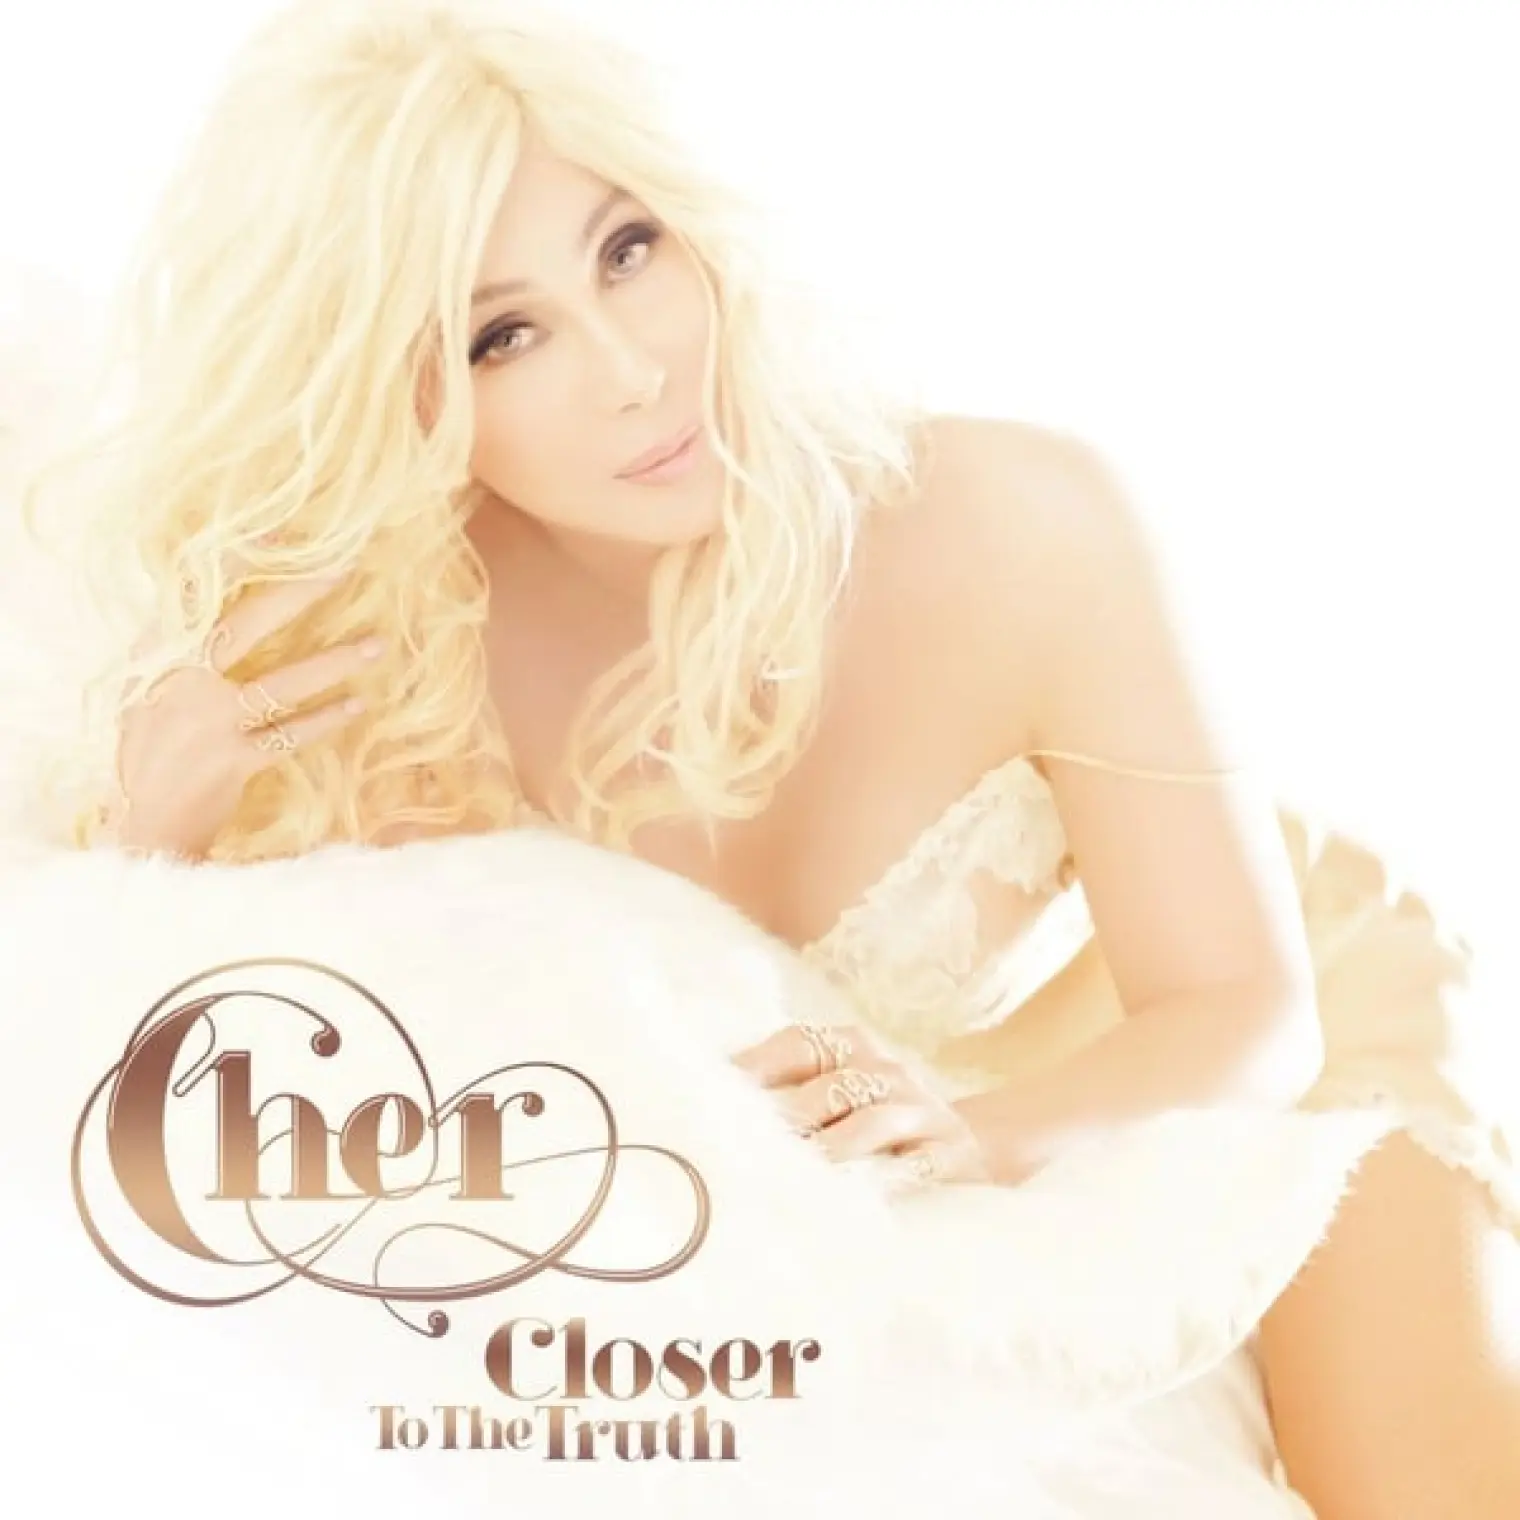 Closer to the Truth (Deluxe Edition) -  Cher 